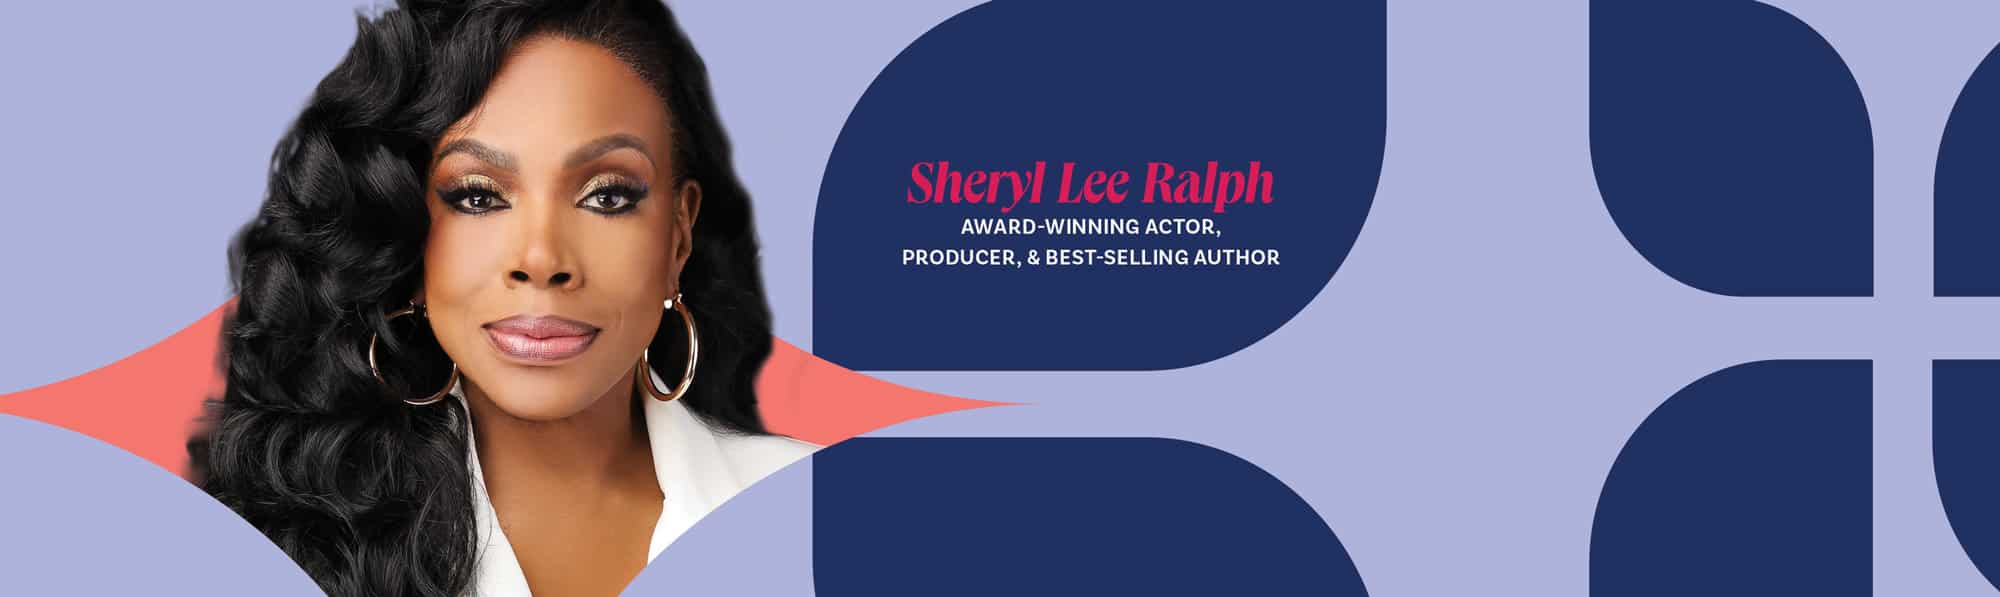 Join Sheryl Lee Ralph at the Pennsylvania Conference for Women on November 7th in Philadelphia, PA!